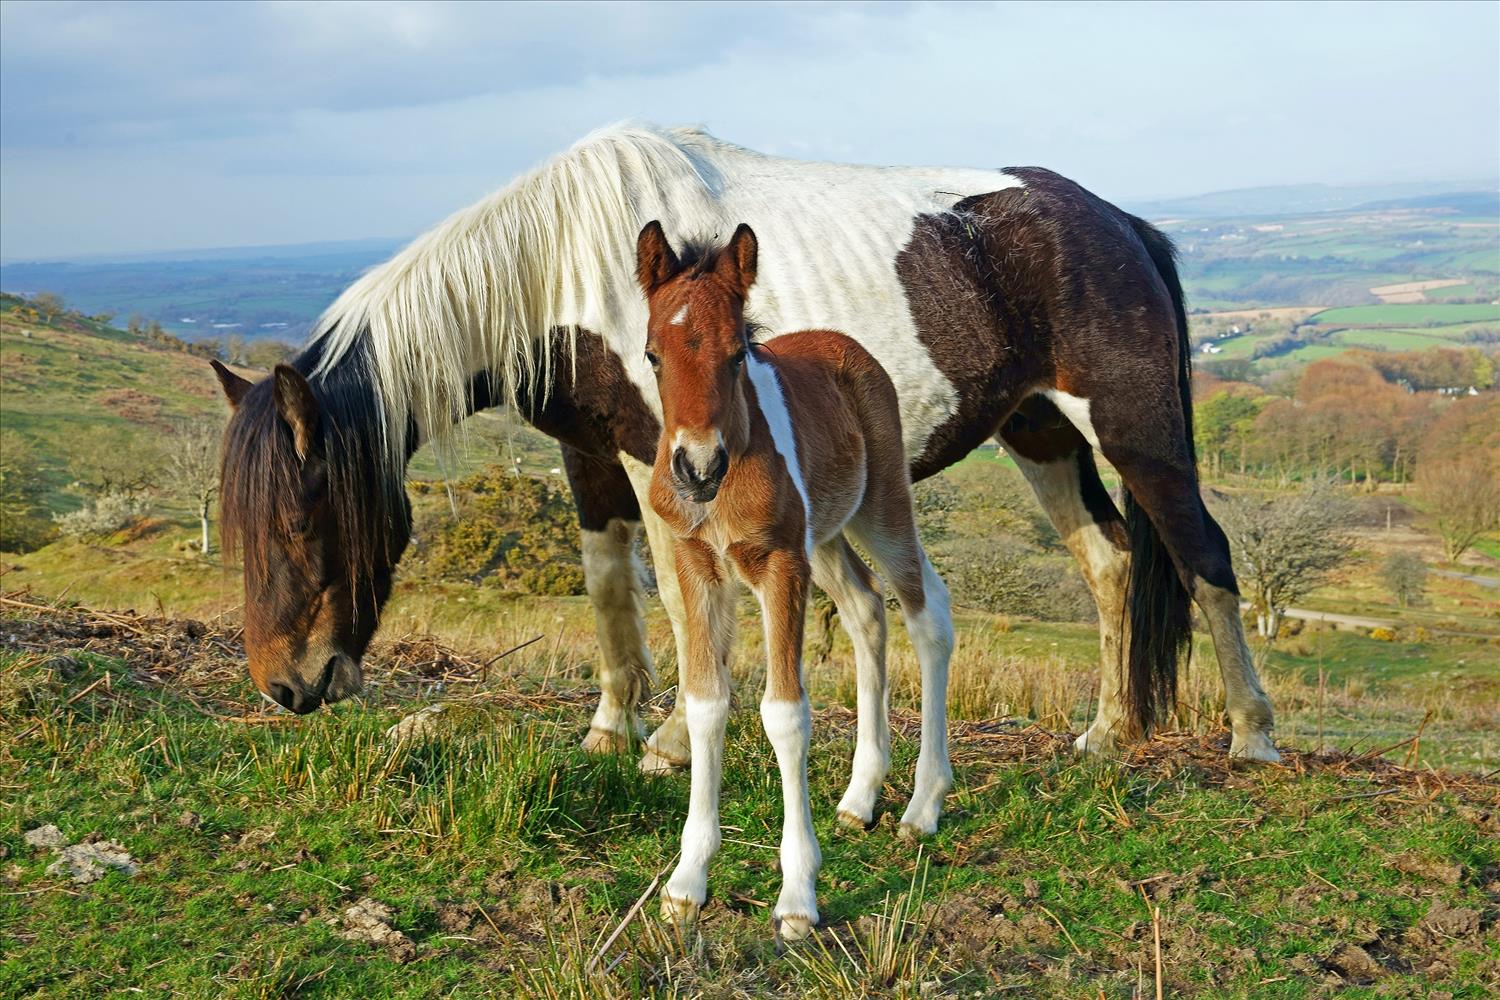 Mother with a beautiful white mane stands with her foal on Bodmin Moor, with expansive fields and countryside visible behind them